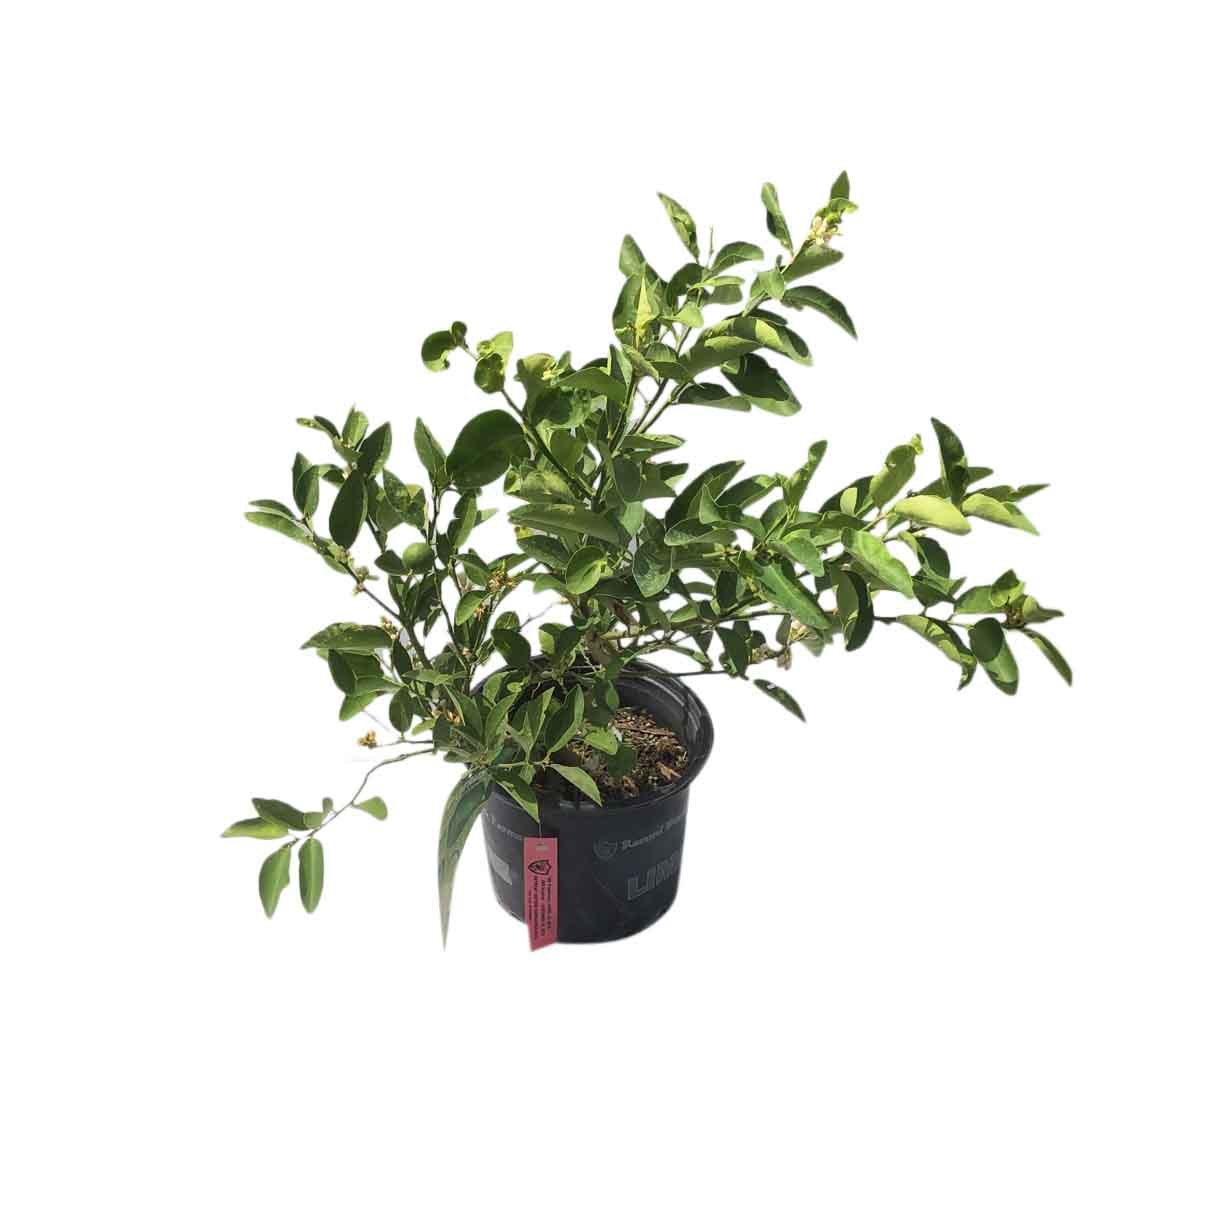 Key Lime Tree for Sale 1 Gal Container from Florida